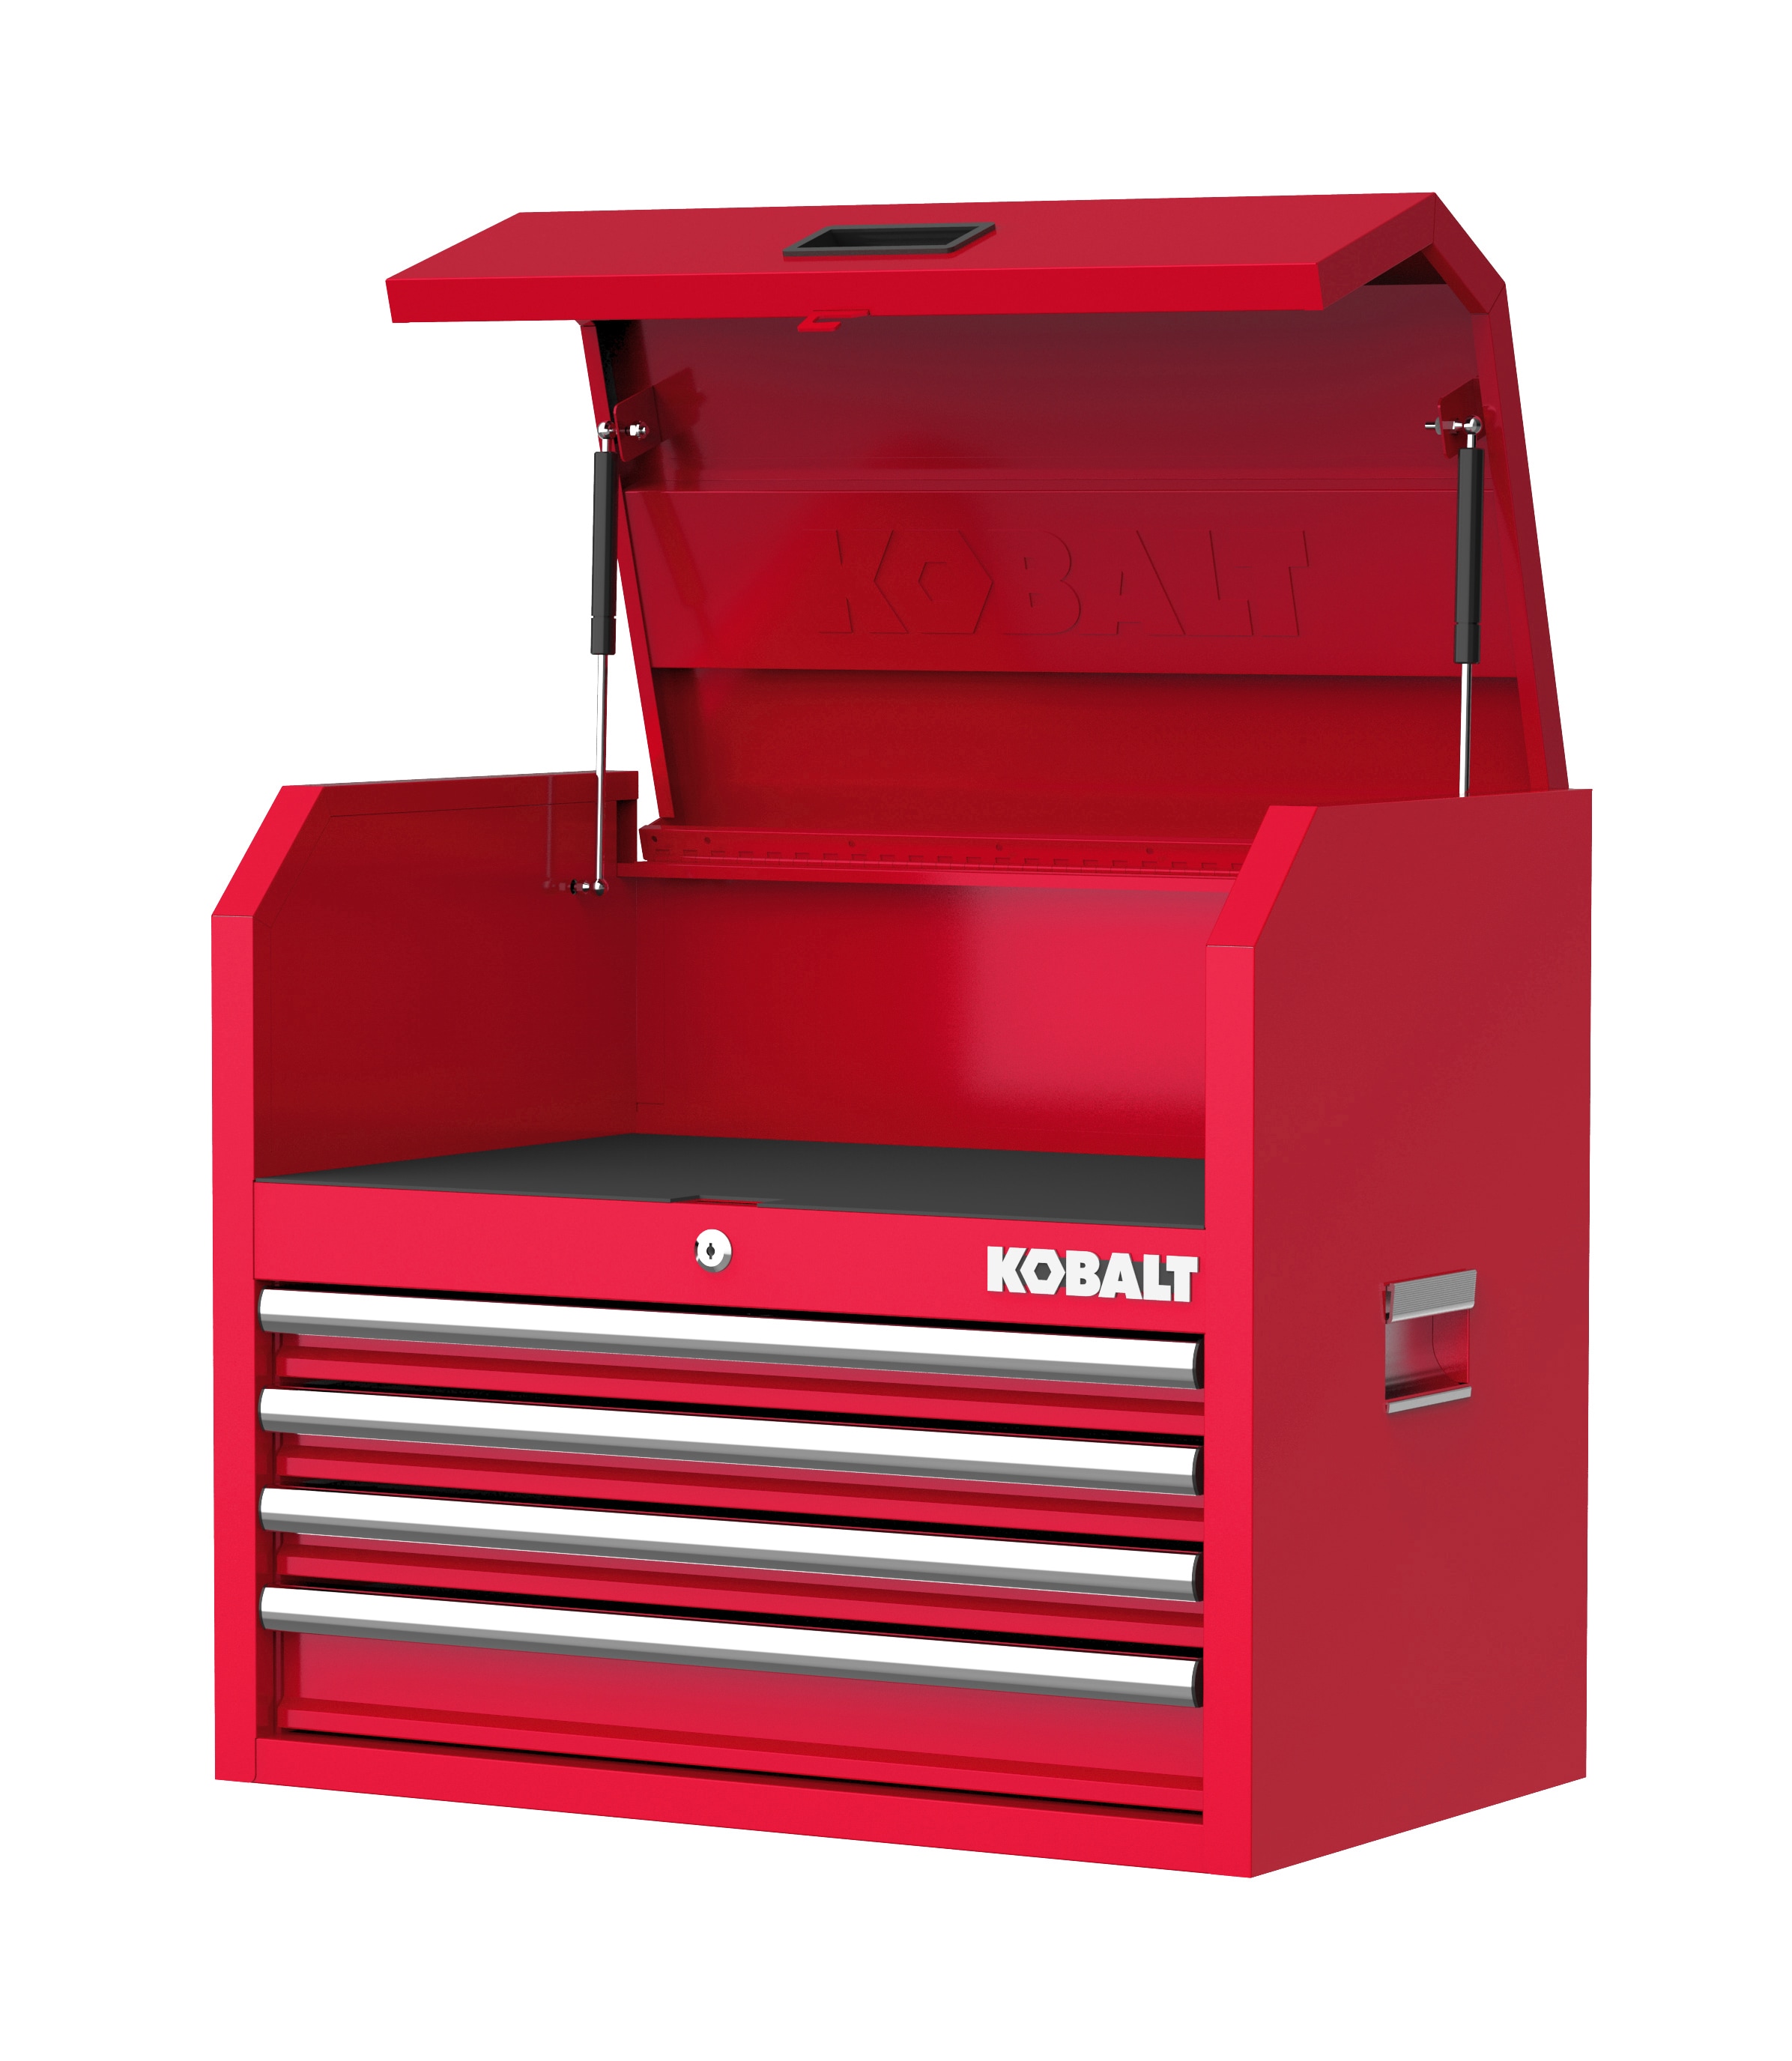 Kobalt 26.7-in Red Rolling Tool Storage Collection